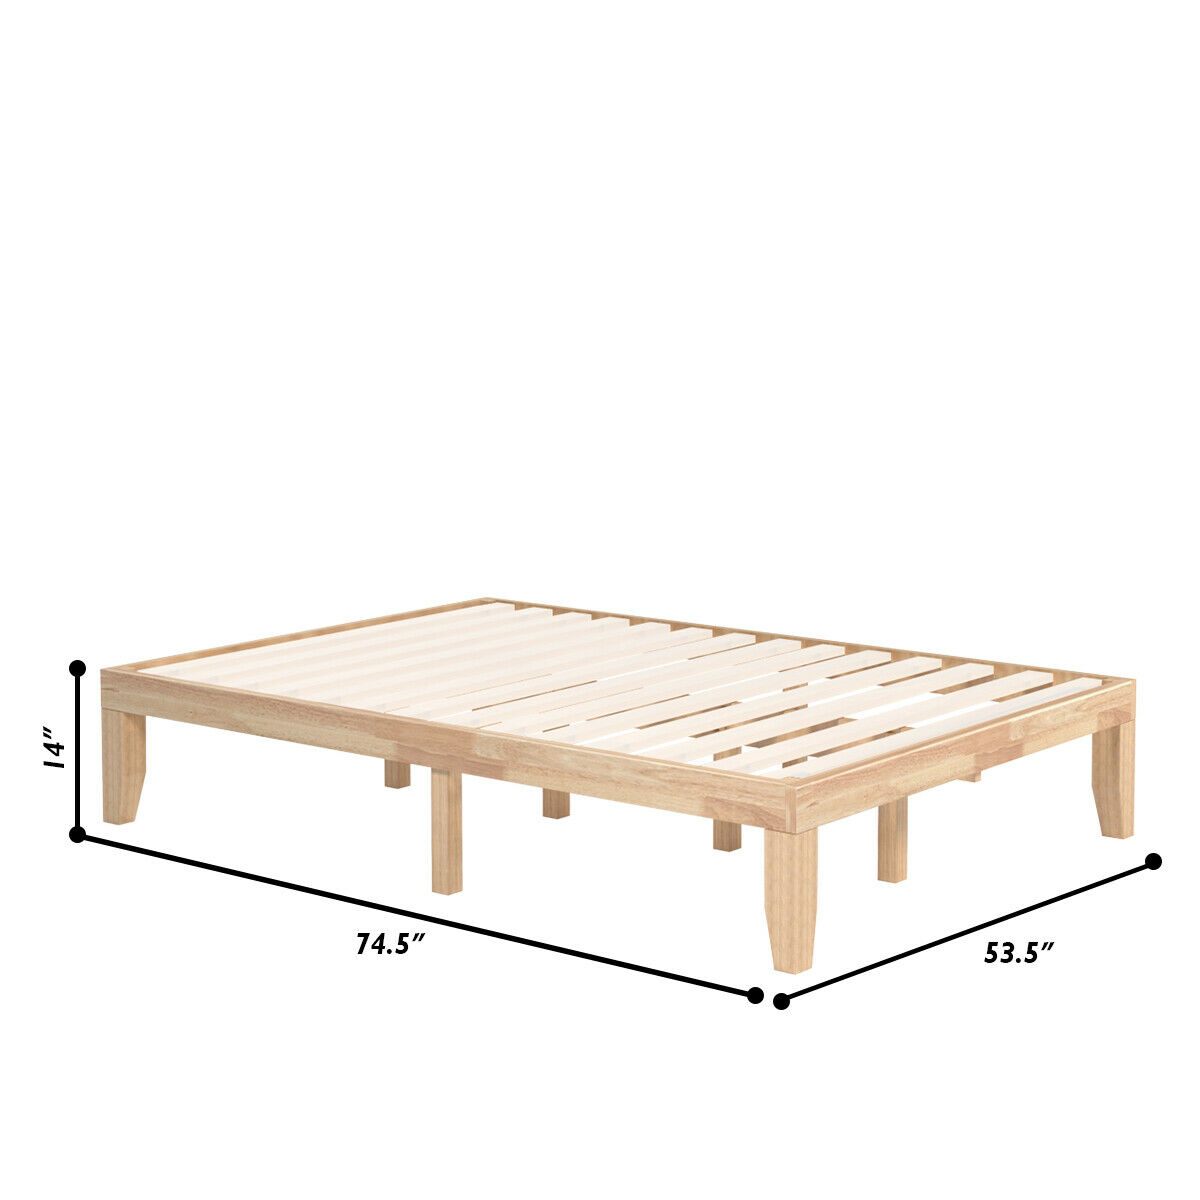 Costway Full Size 14 Wooden Bed Frame, Full Bed Frame With Slats